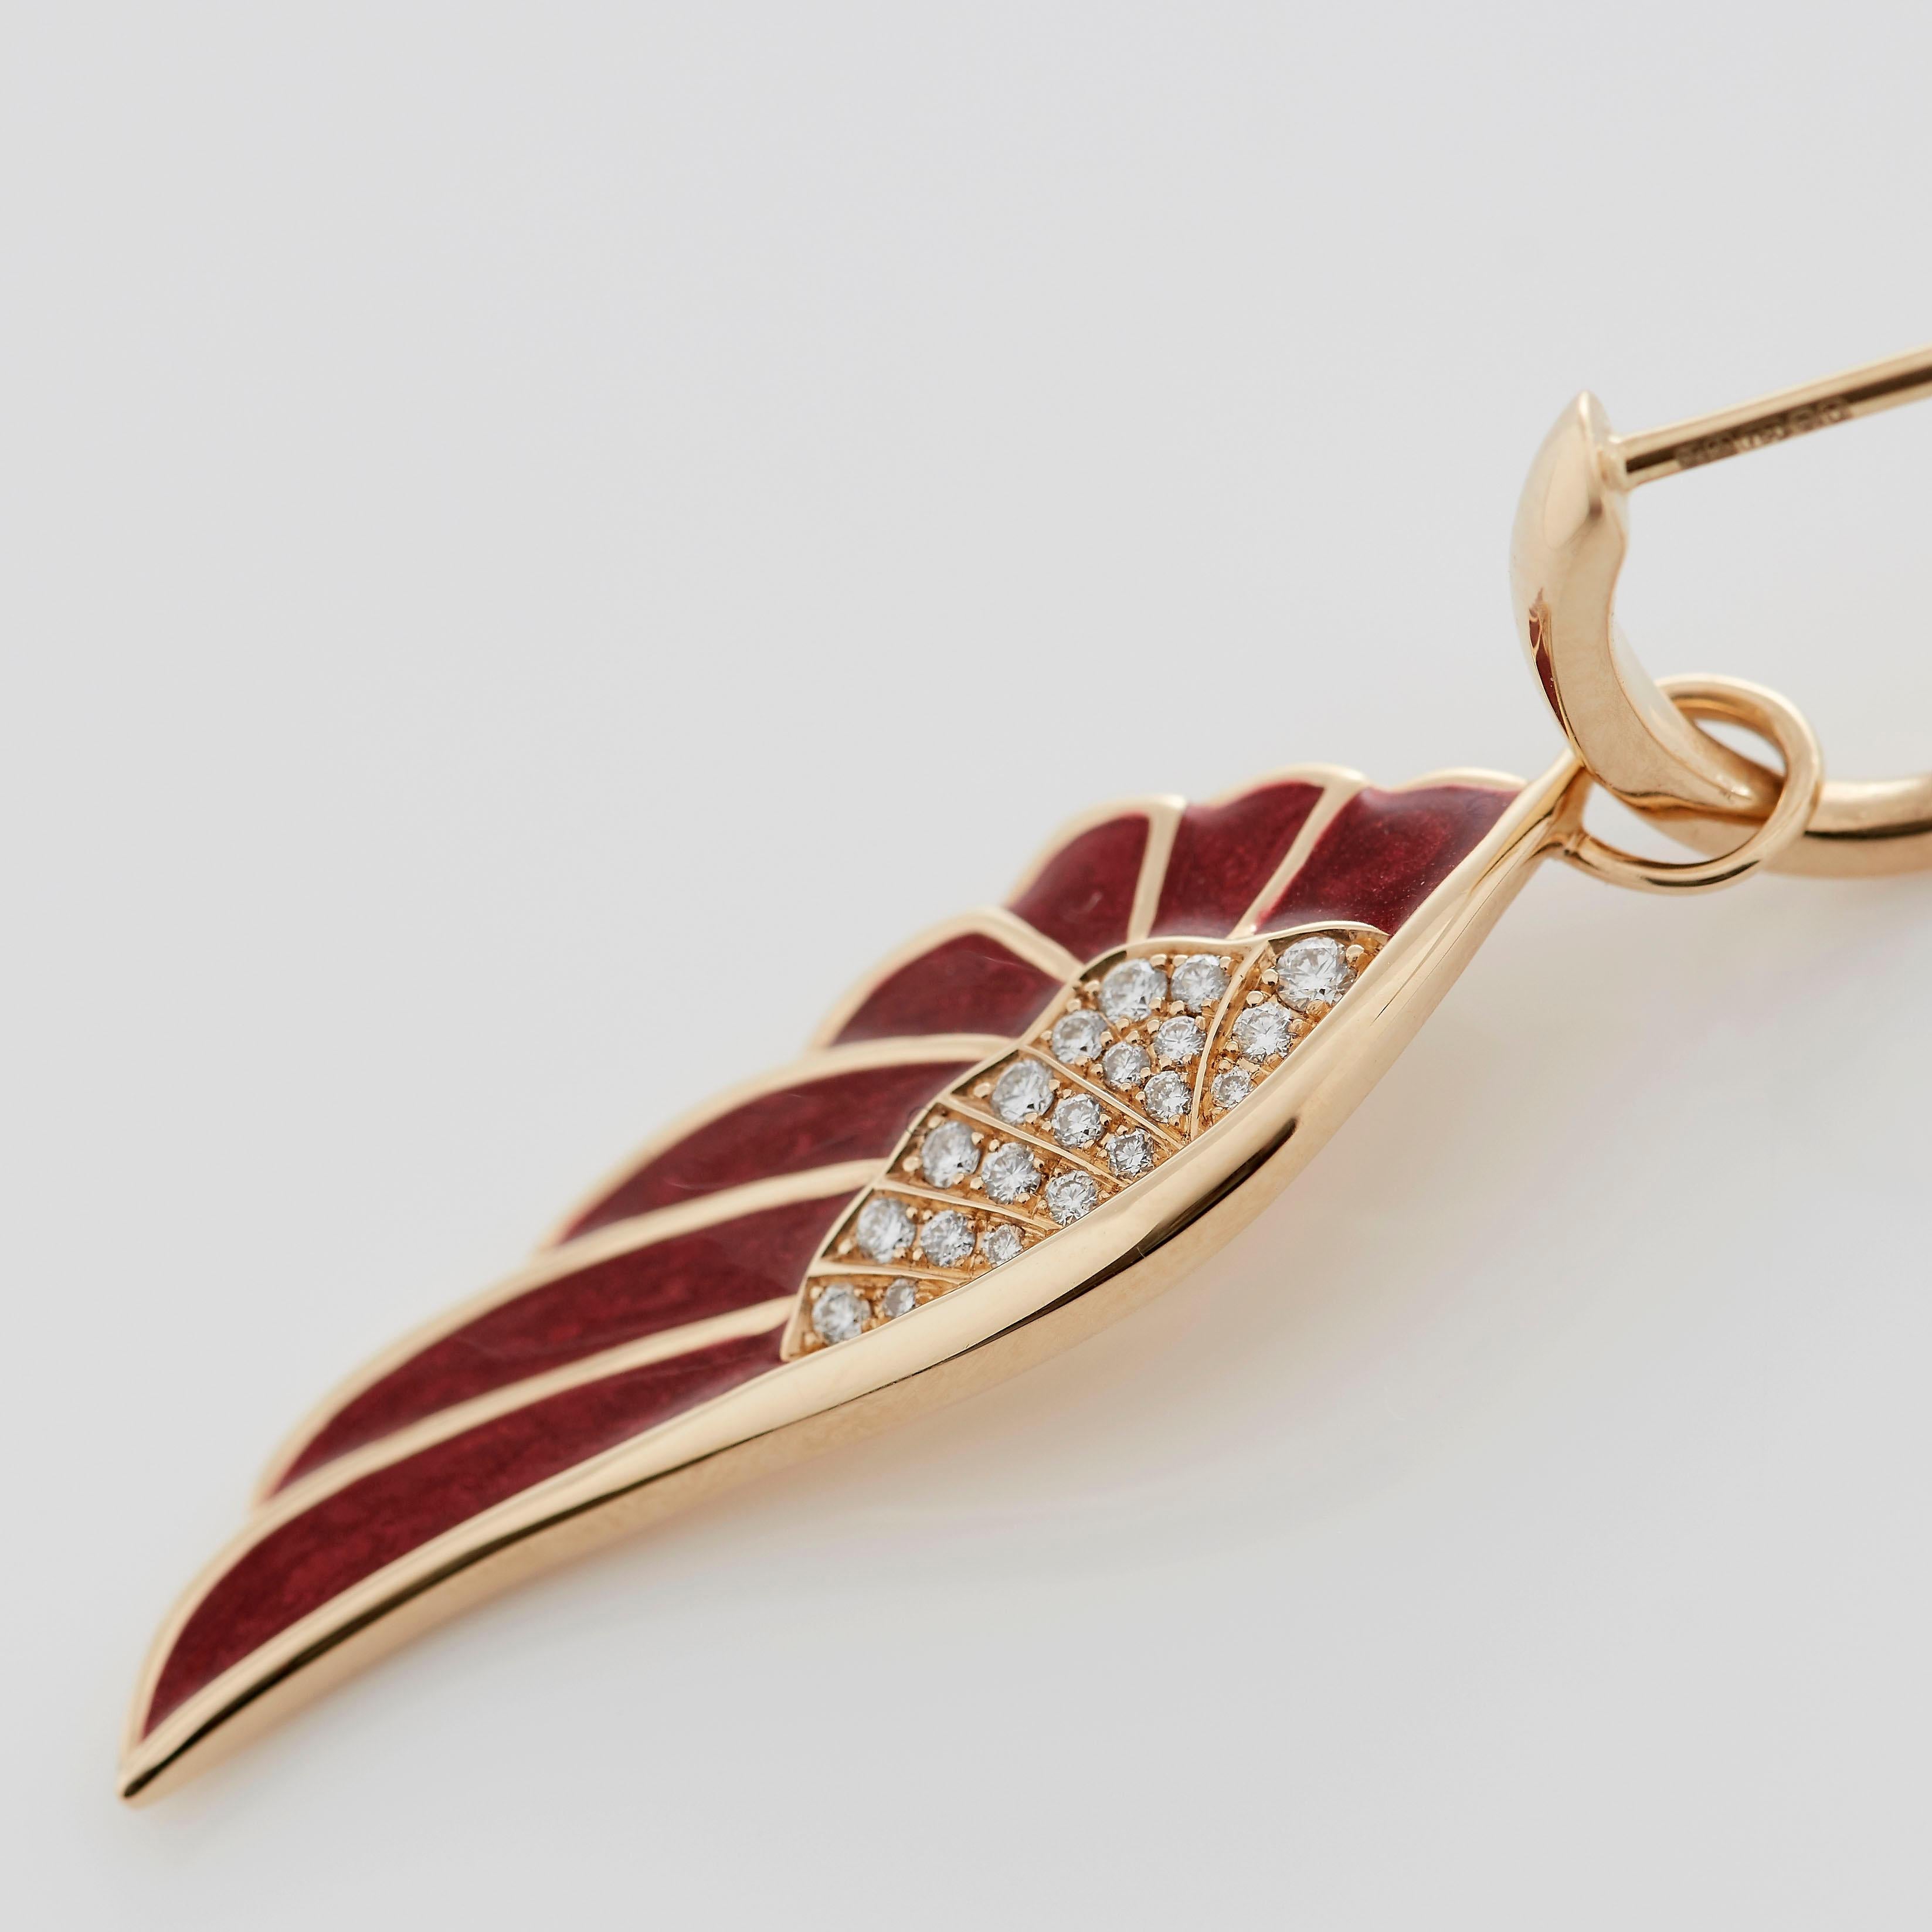 A House of Garrard 18 karat yellow gold earrings from the 'Wings Reflection' collection, set with round white diamonds and 'Autumn' coloured enamel.

40 round white diamonds weighing: 0.23cts

The House of Garrard is the longest serving jeweller in